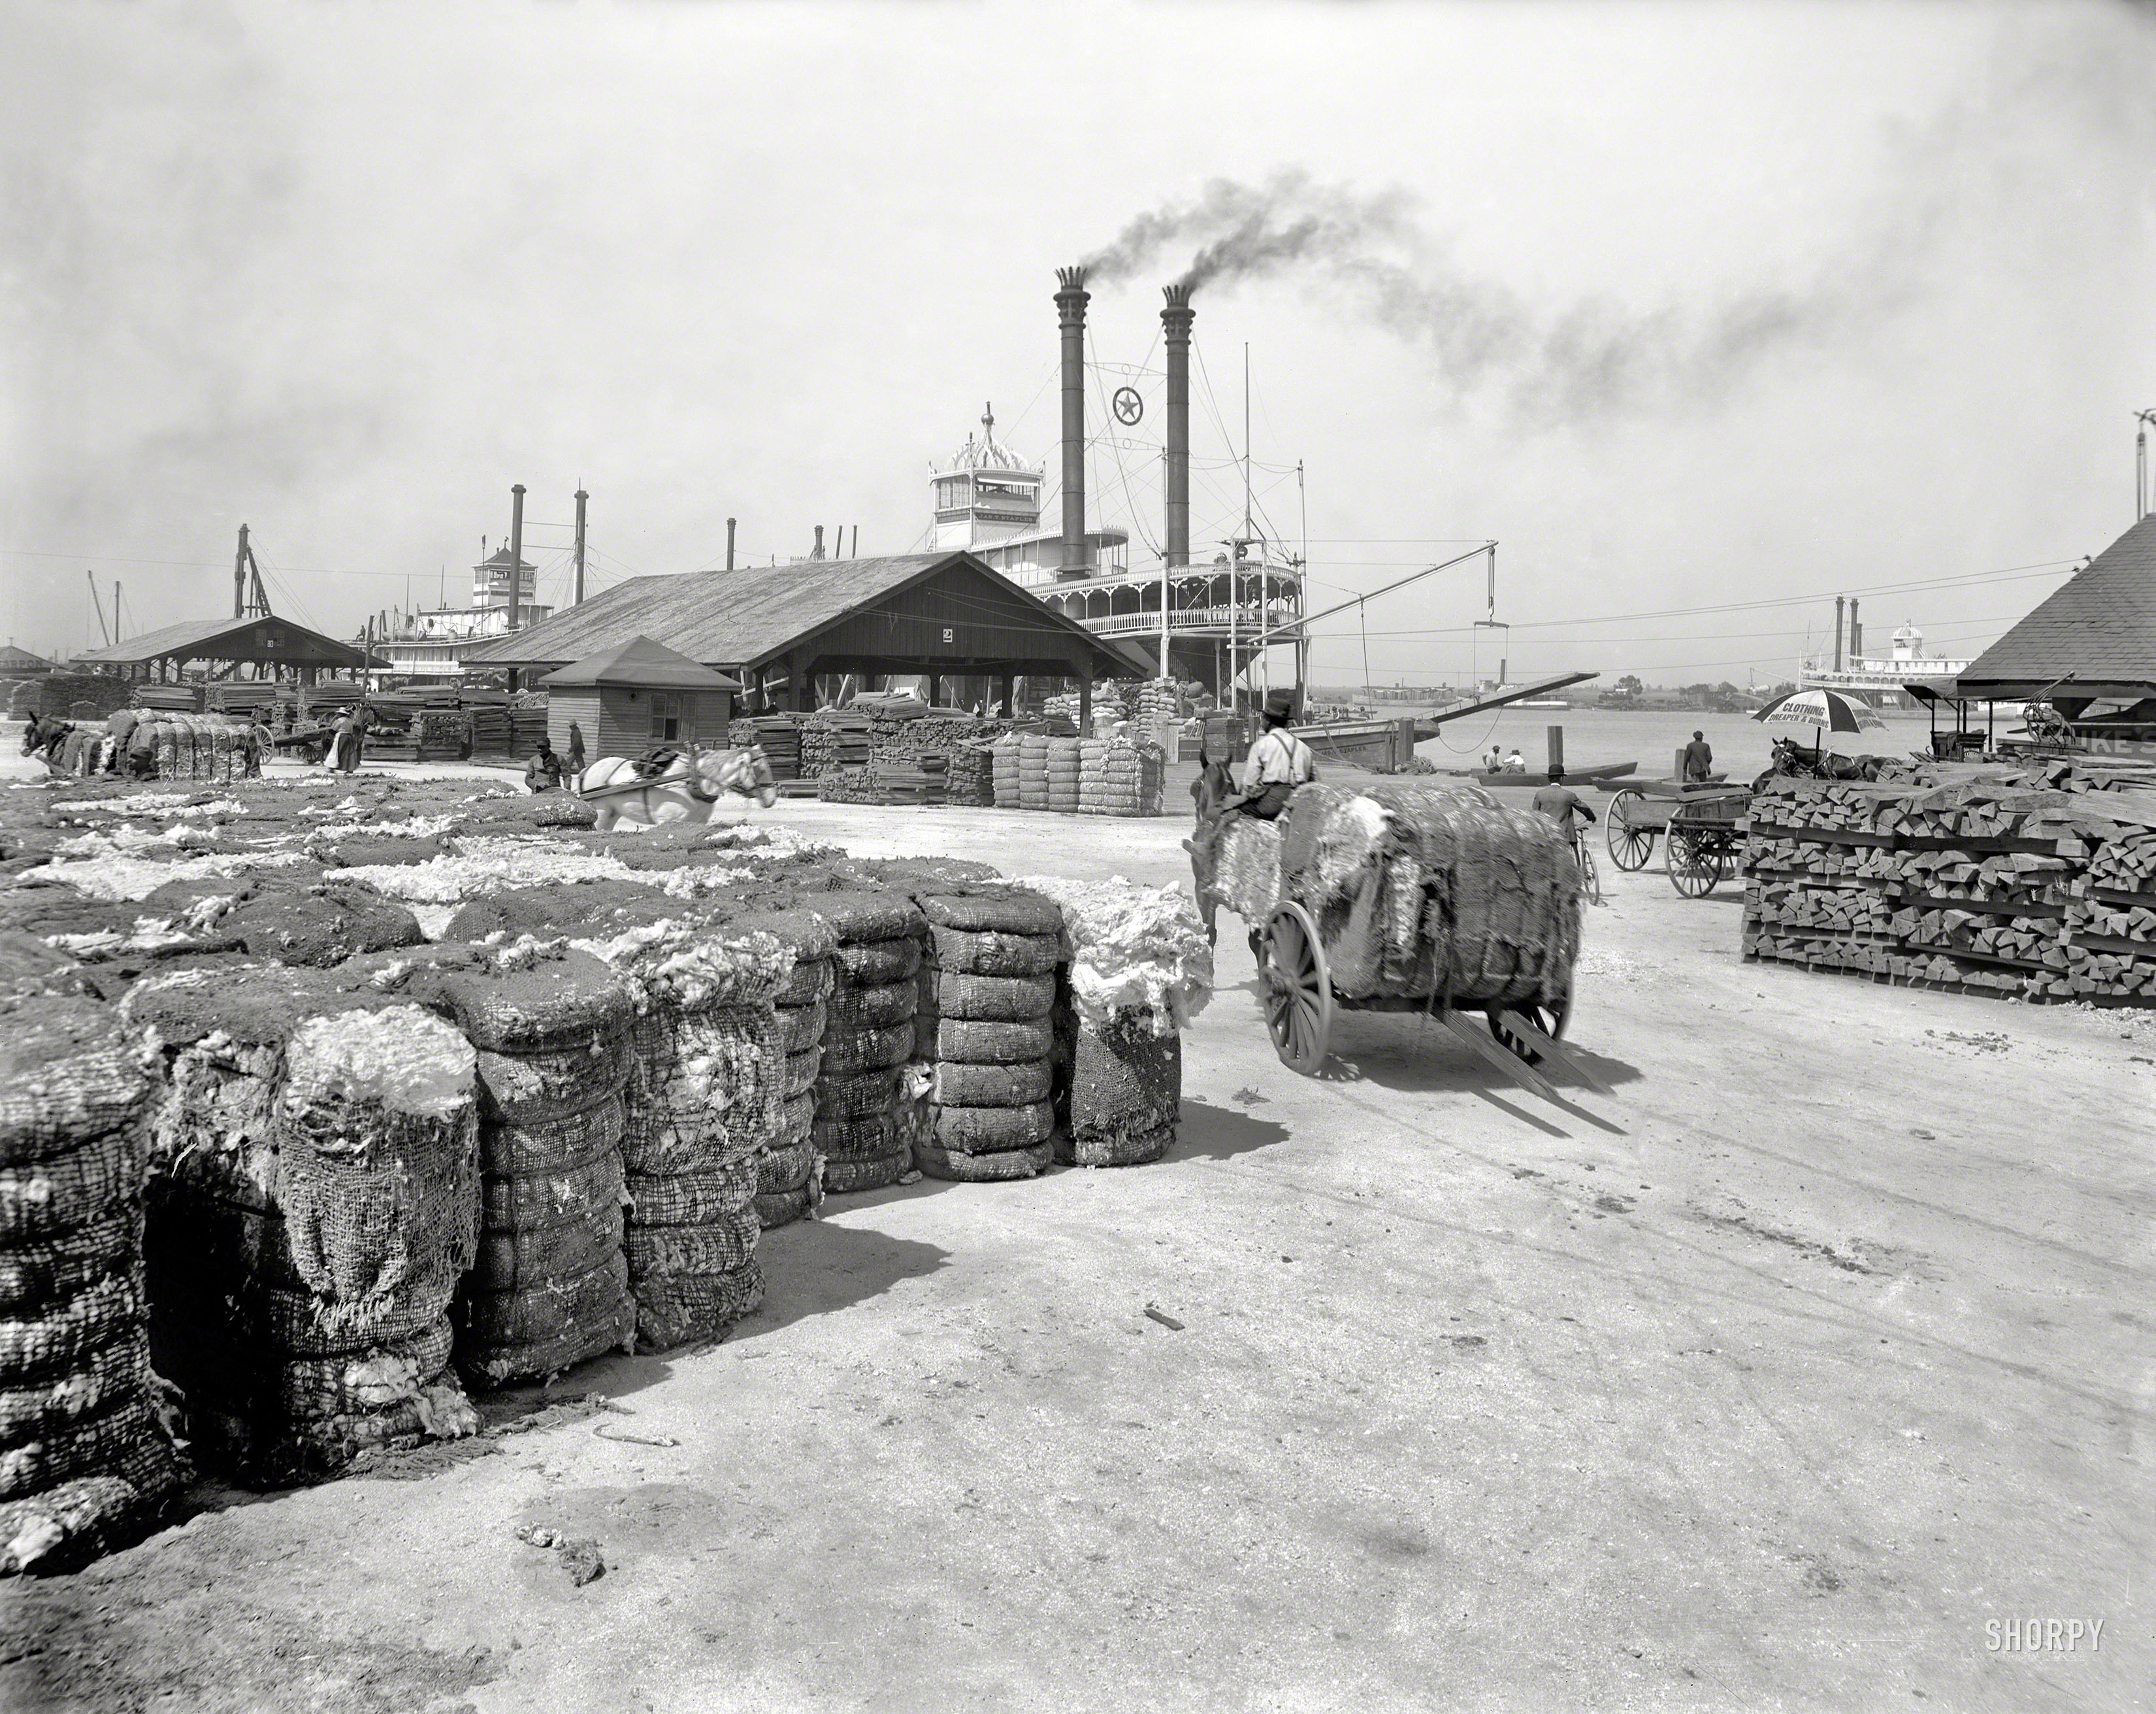 Alabama circa 1905. "The cotton docks at Mobile." Big bales of bolls. 8x10 inch dry plate glass negative, Detroit Publishing Company. View full size.